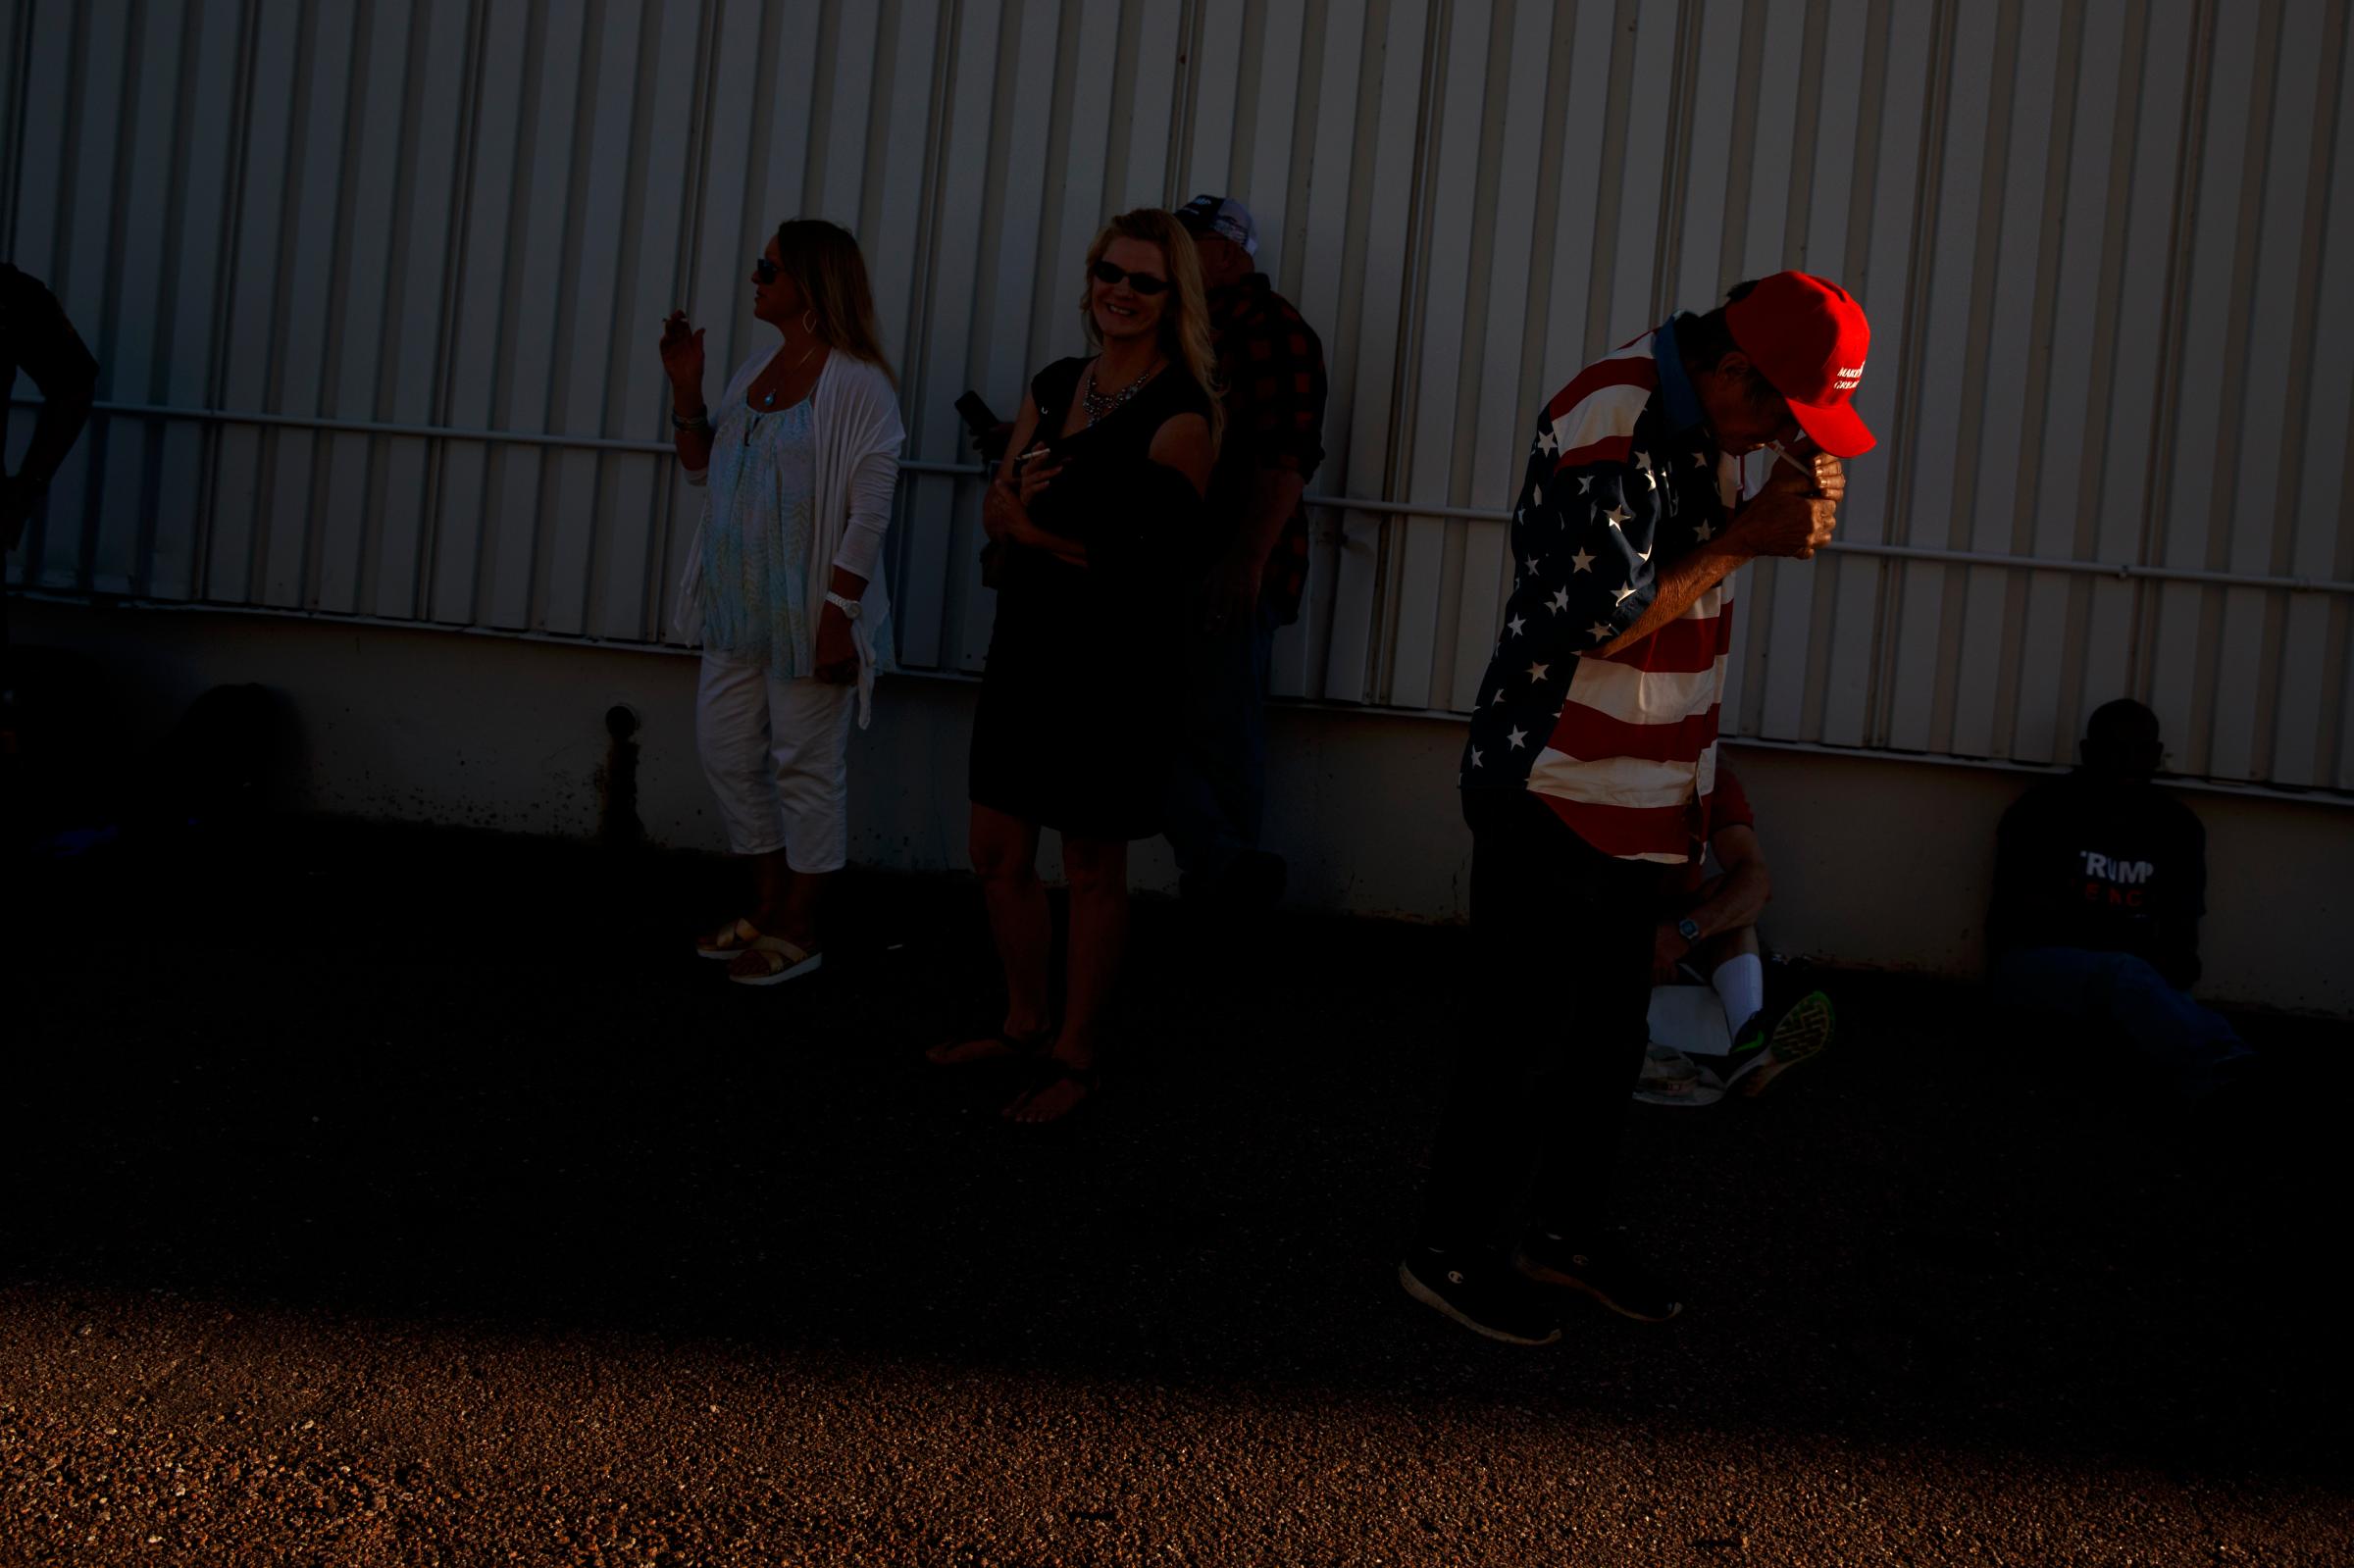 Robert Einspahr, of Denver, lights a cigarette as he waits for the arrival Republican presidential candidate Donald Trump to a campaign rally, Sept. 17, 2016, in Colorado Springs, Colo.